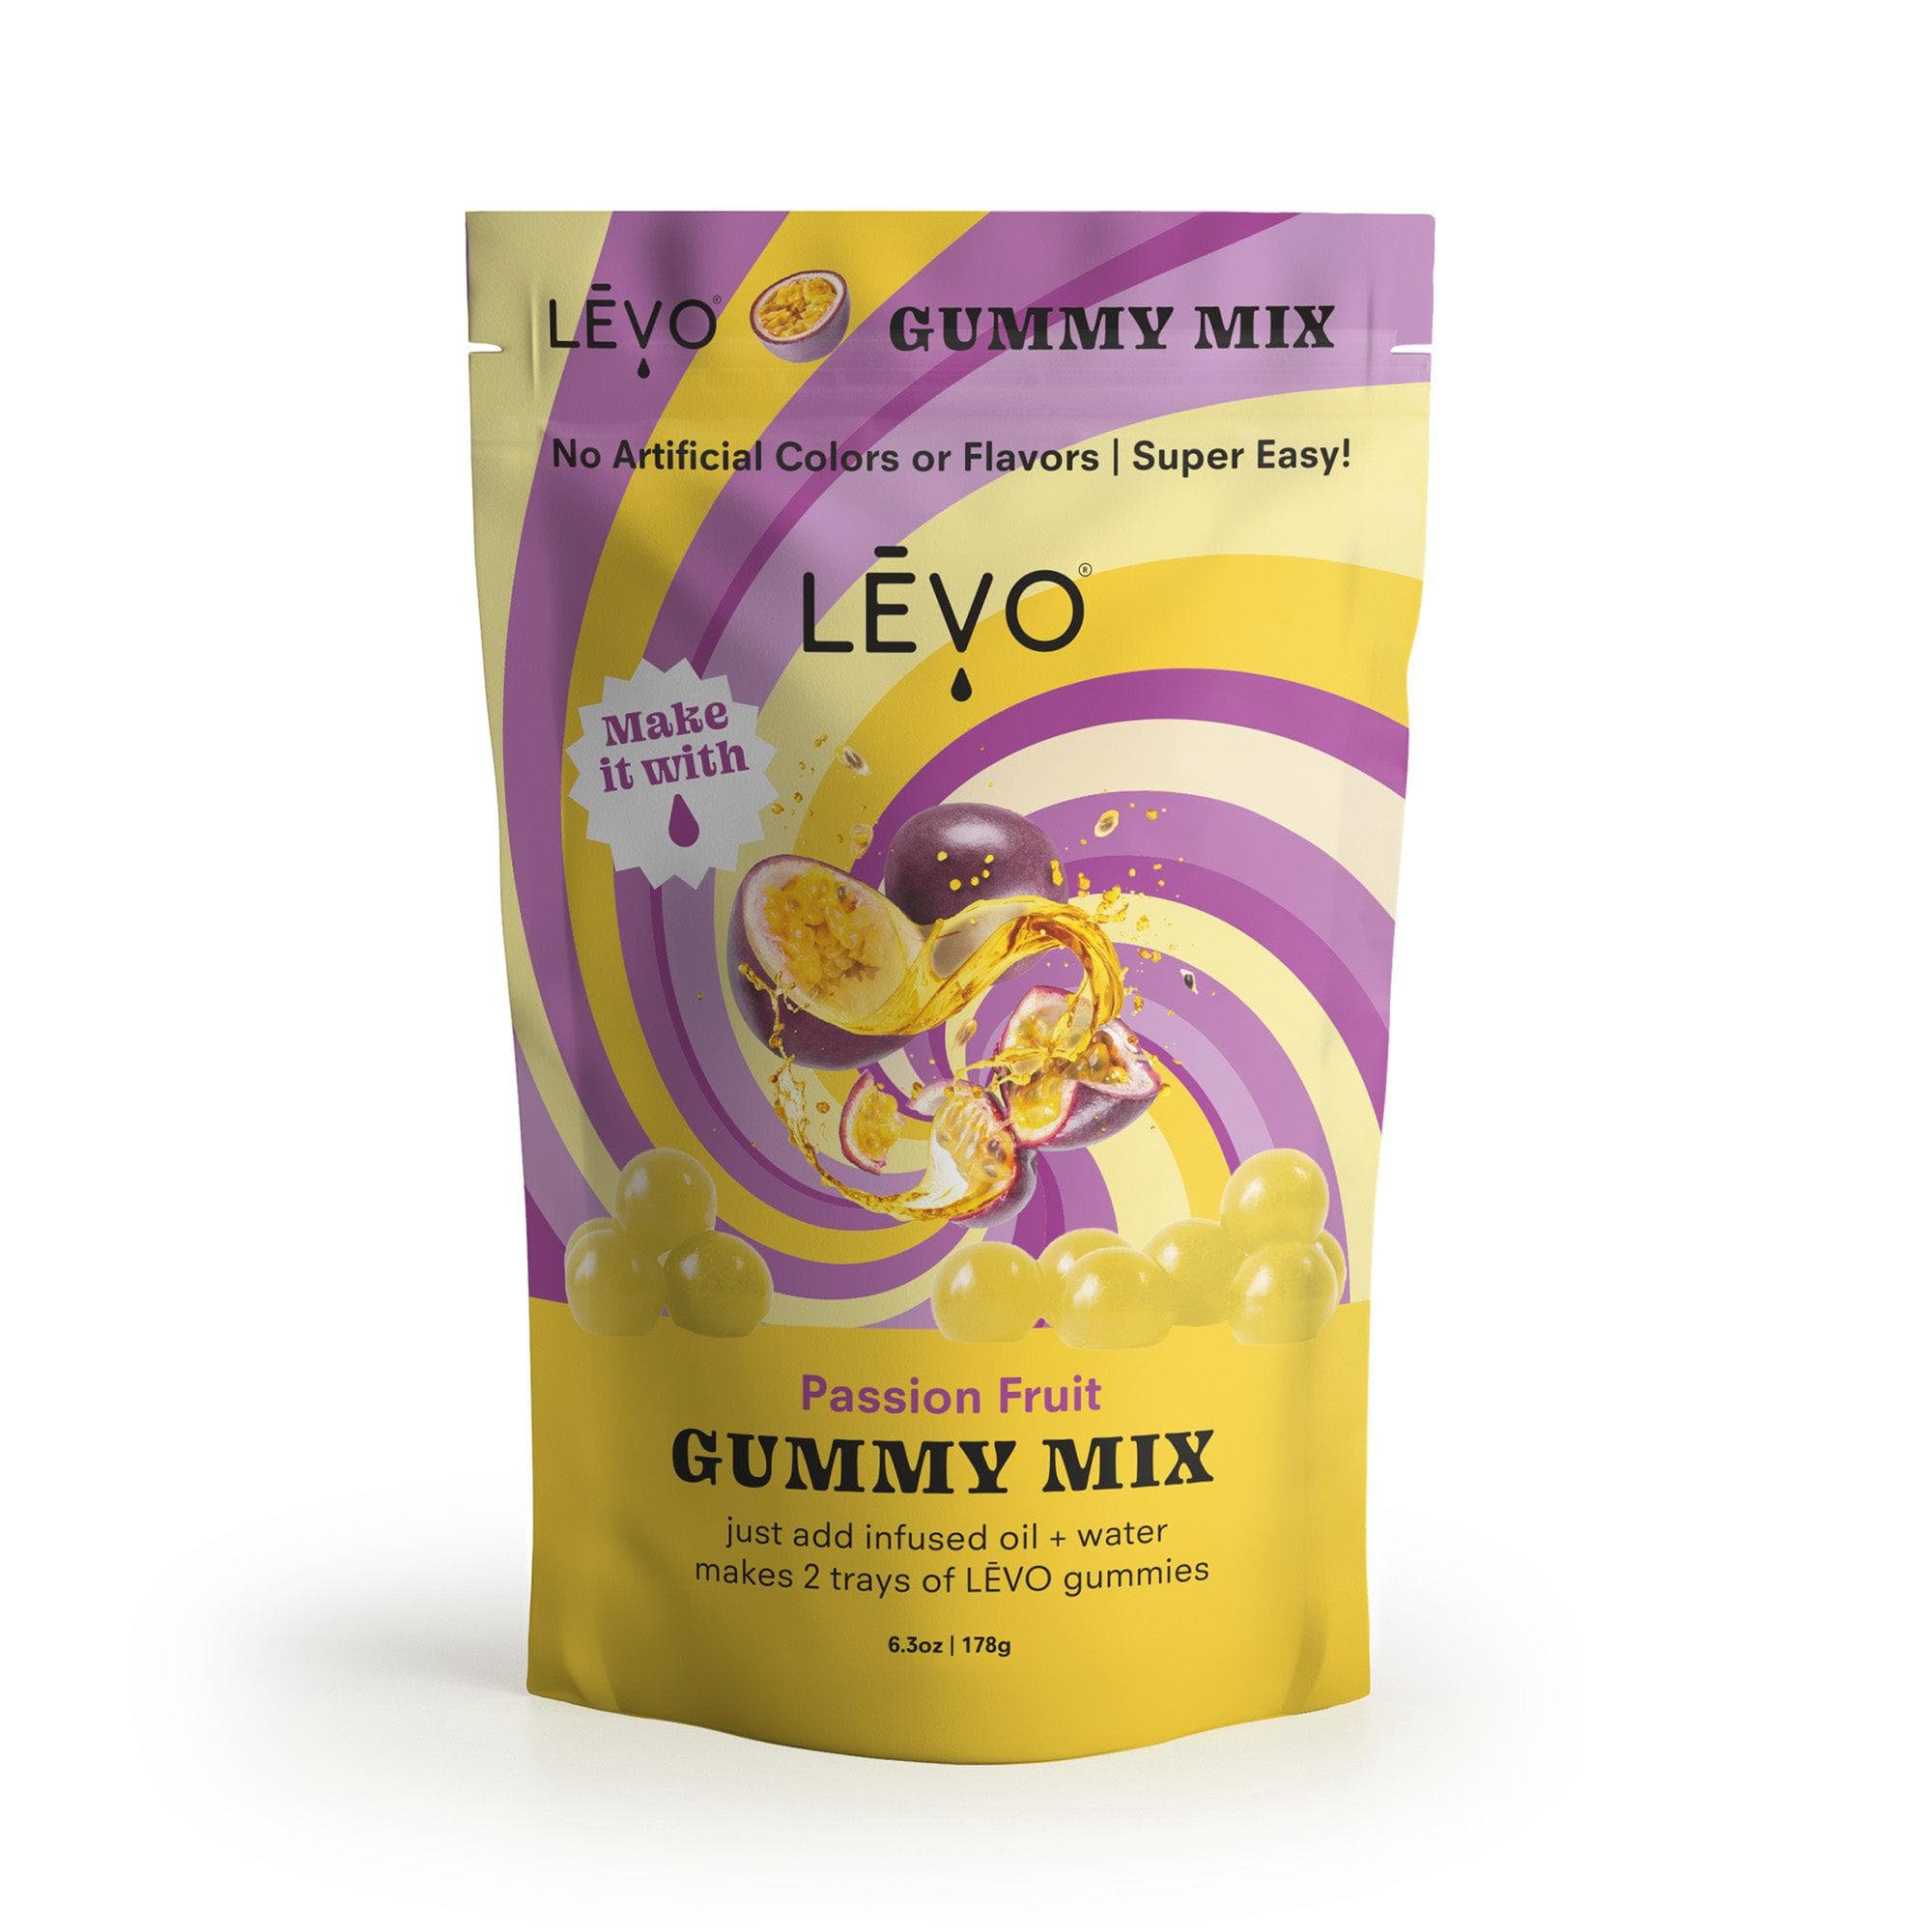 LEVO gummy mix Passion Fruit flavored limited edition